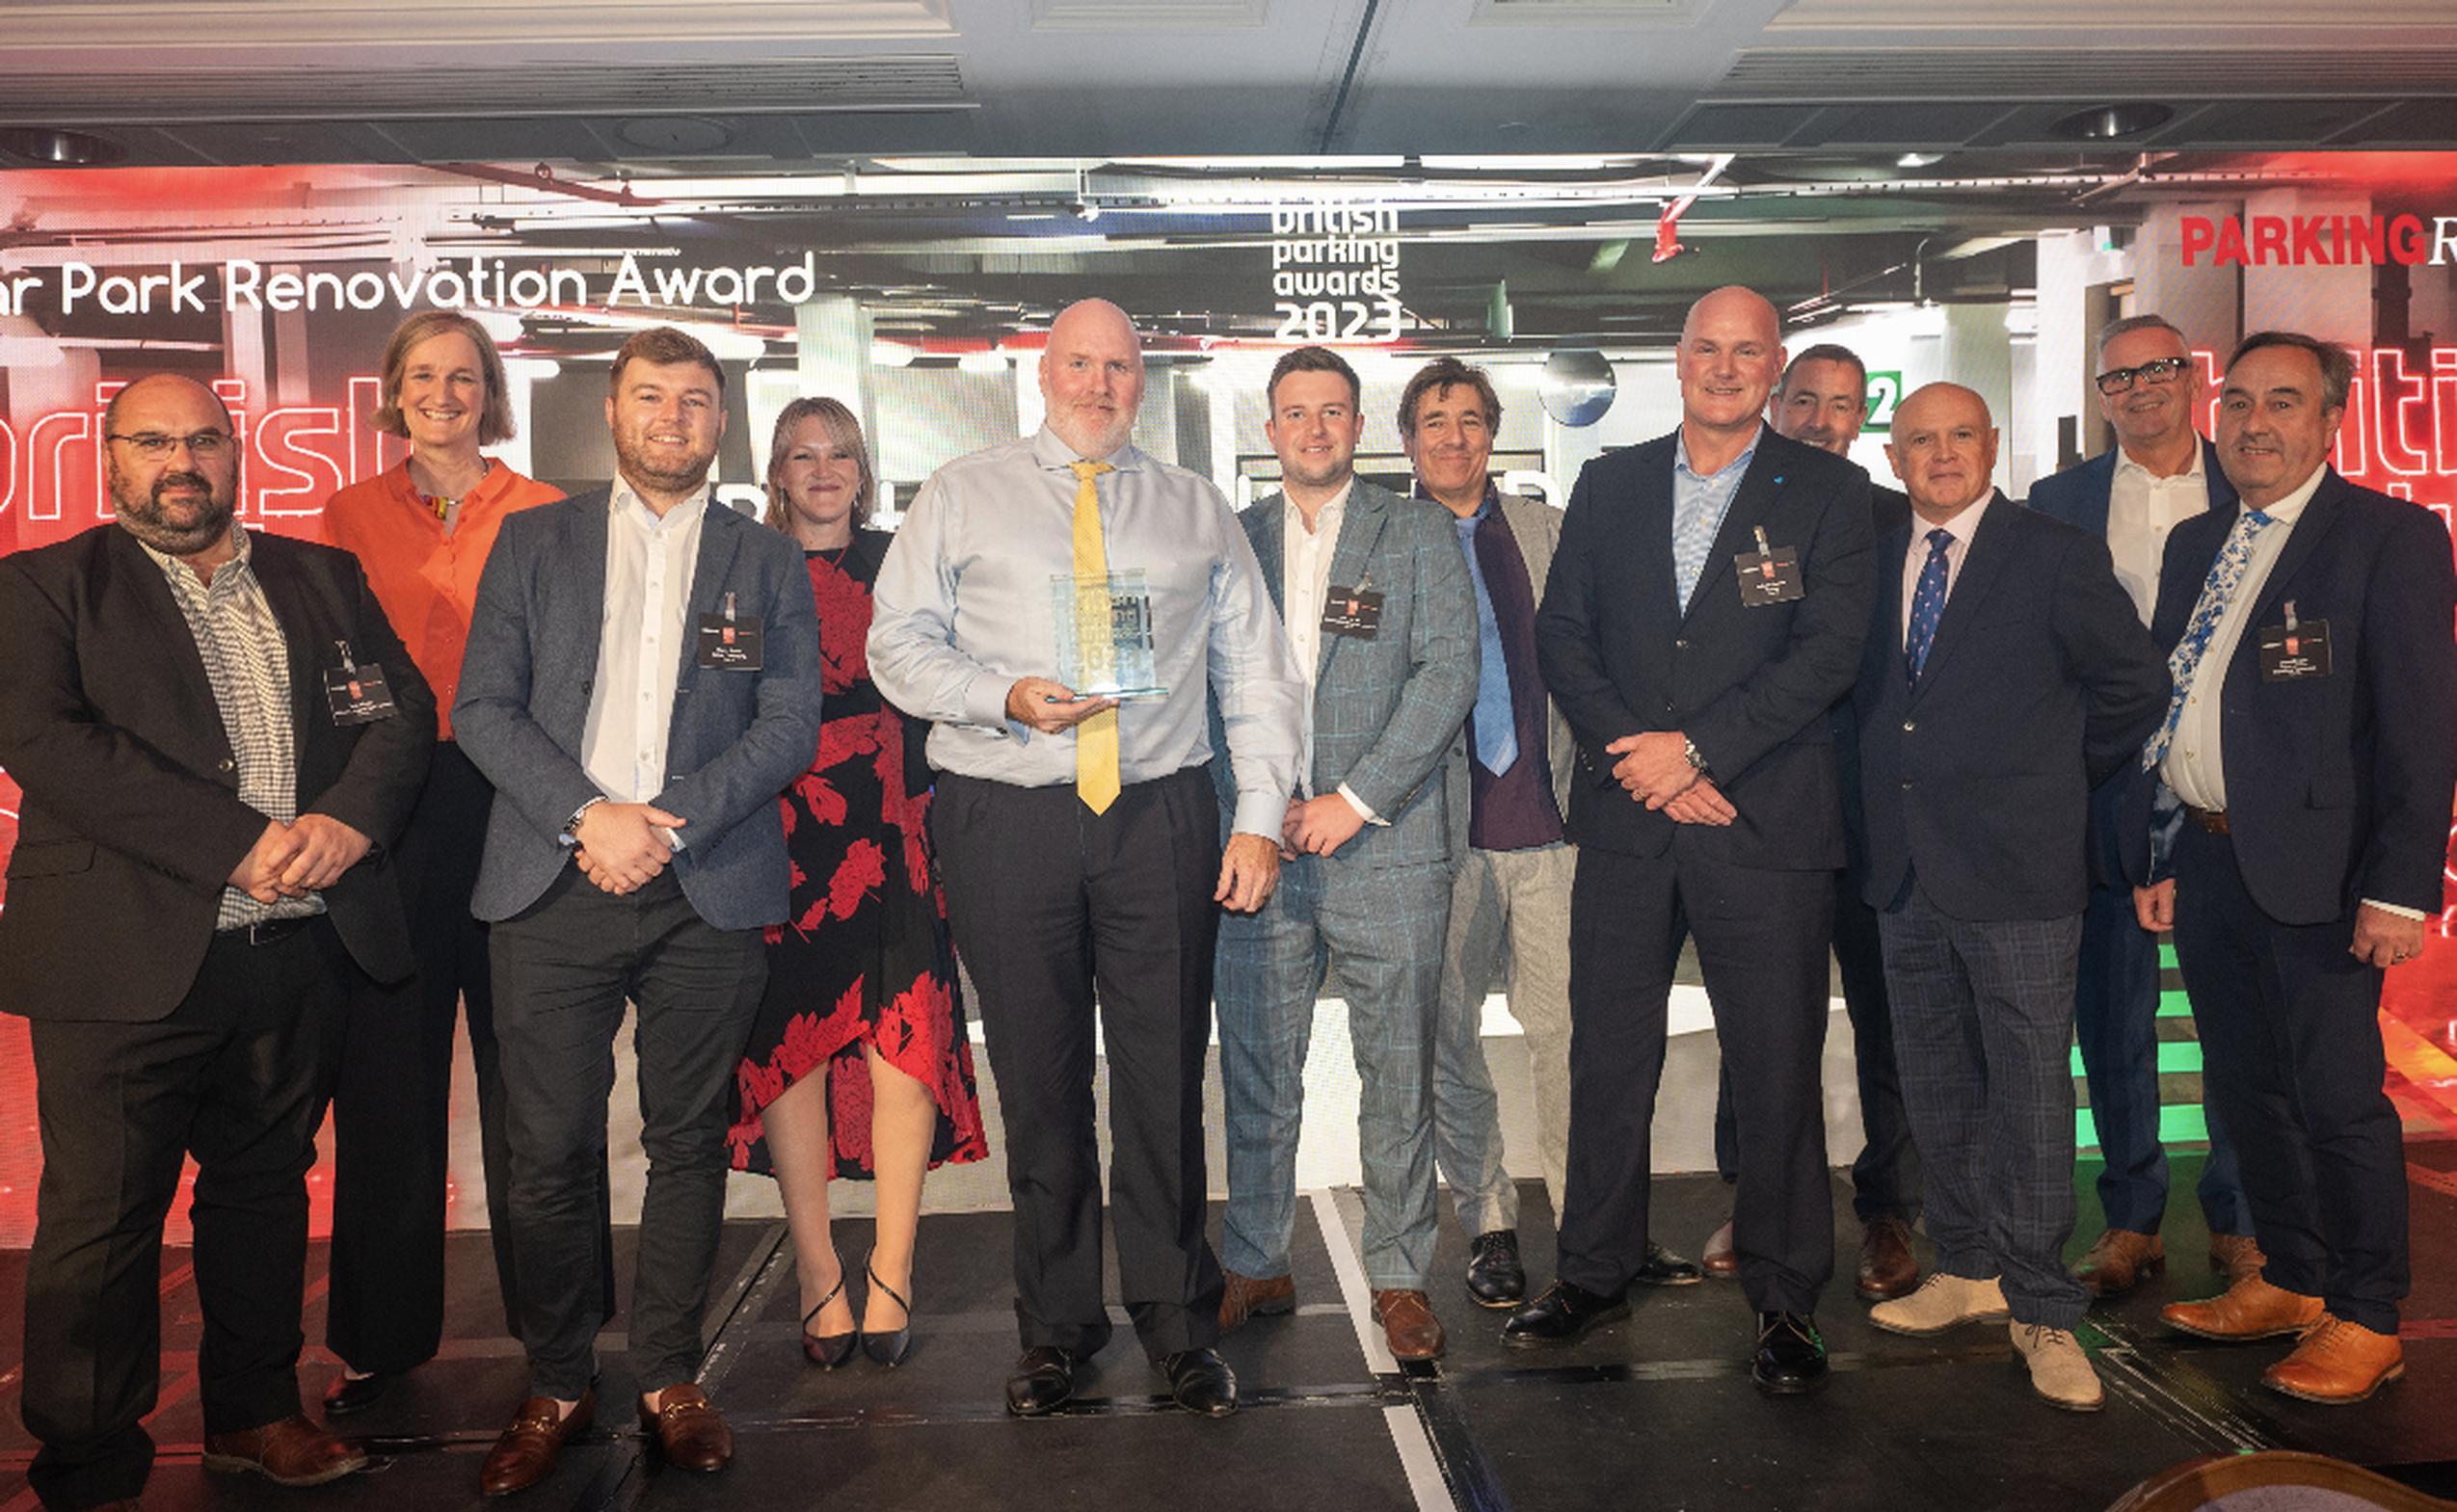 Sean Allsop (Makers), Polly Church and Harry Smith (Potter Church & Holmes Architects), Sian McGoun (Cushman & Wakefield), Willy McCrimmon and Joe Marler (Makers), Mark Steel, Richard Bowyer and Tony Mills (Triflex), Simon Lamb and Darren Wootton (Makers), and David Peach (jury)